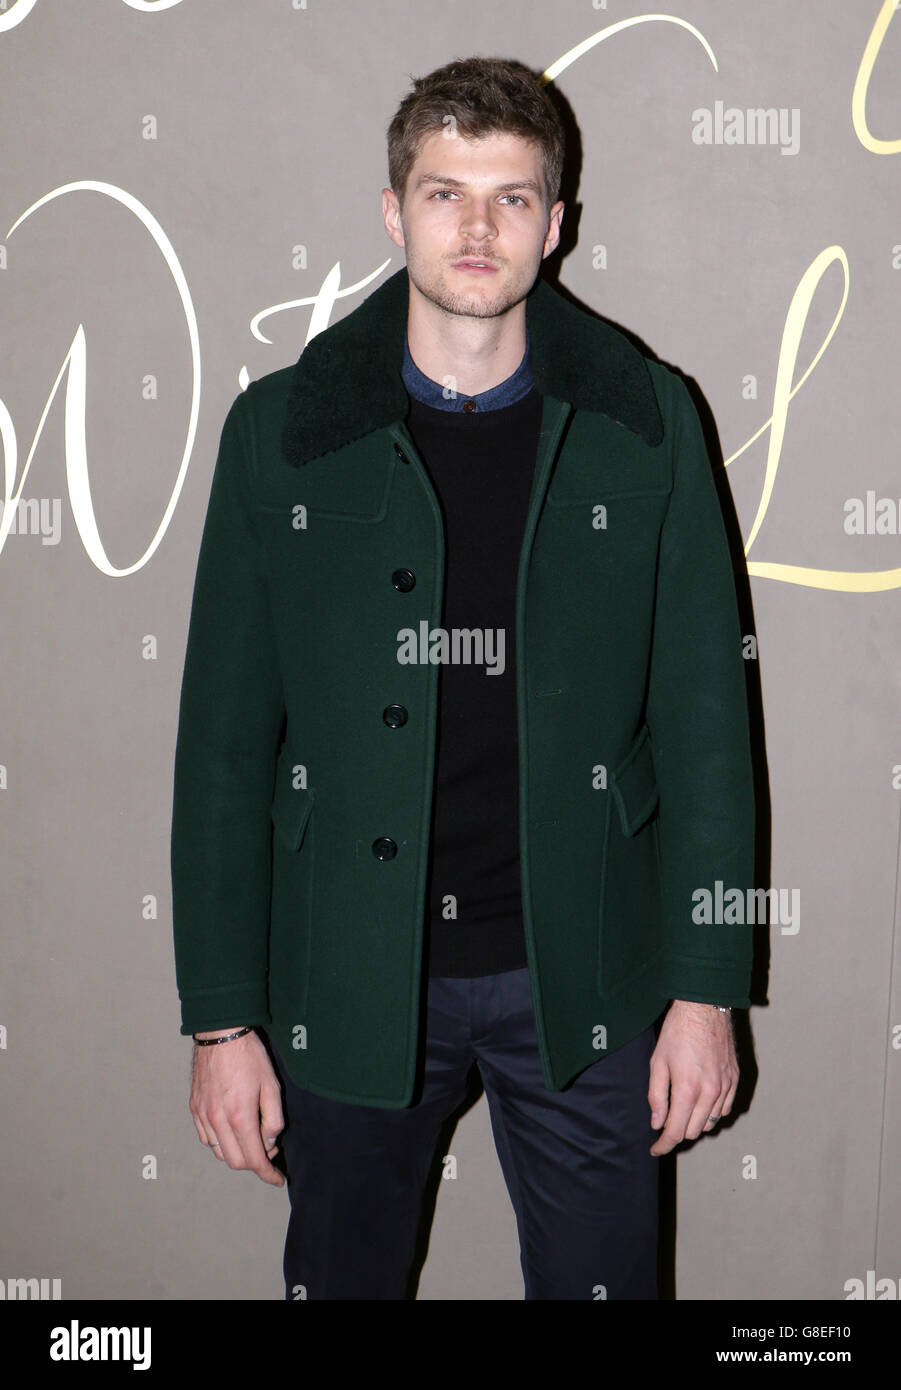 Jim Chapman arriving for the premiere of the Burberry festive film, hosted by chief creative and chief executive officer Christopher Bailey and Elton John at Burberry, Regent Street, London. PRESS ASSOCIATION Photo. Picture date: Tuesday November 3, 2015. Photo credit should read: Daniel Leal-Olivas/PA Wire Stock Photo